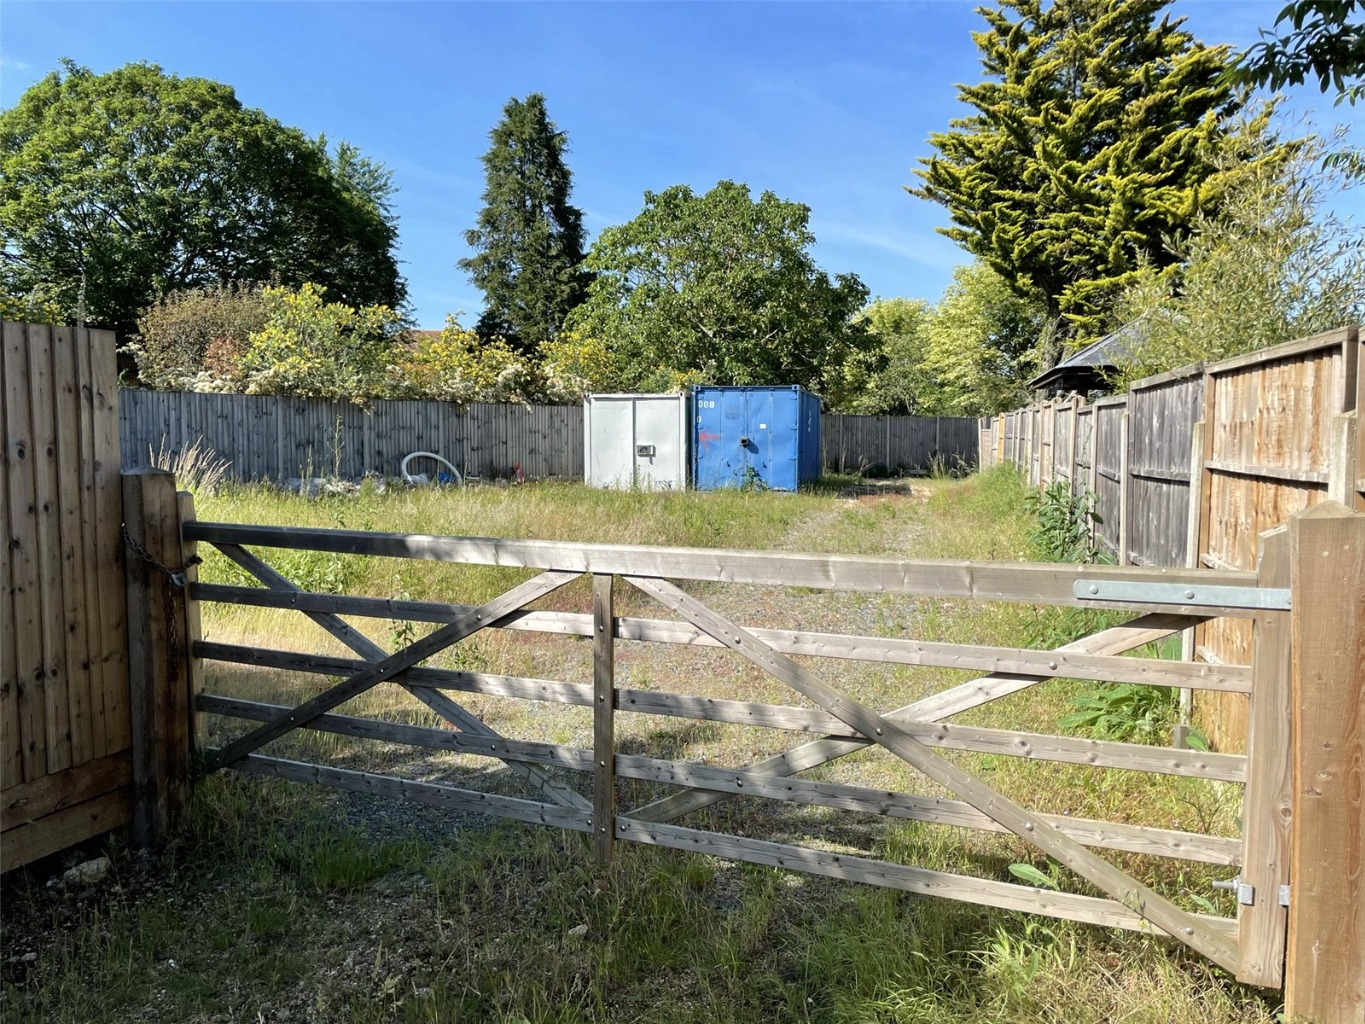 We’re pleased to offer for sale this plot of land, situated in one of the most sought-after locations in St Neots.   Offered for sale by informal tender.  Please note that this amenity land has not got any planning permission attached at present.